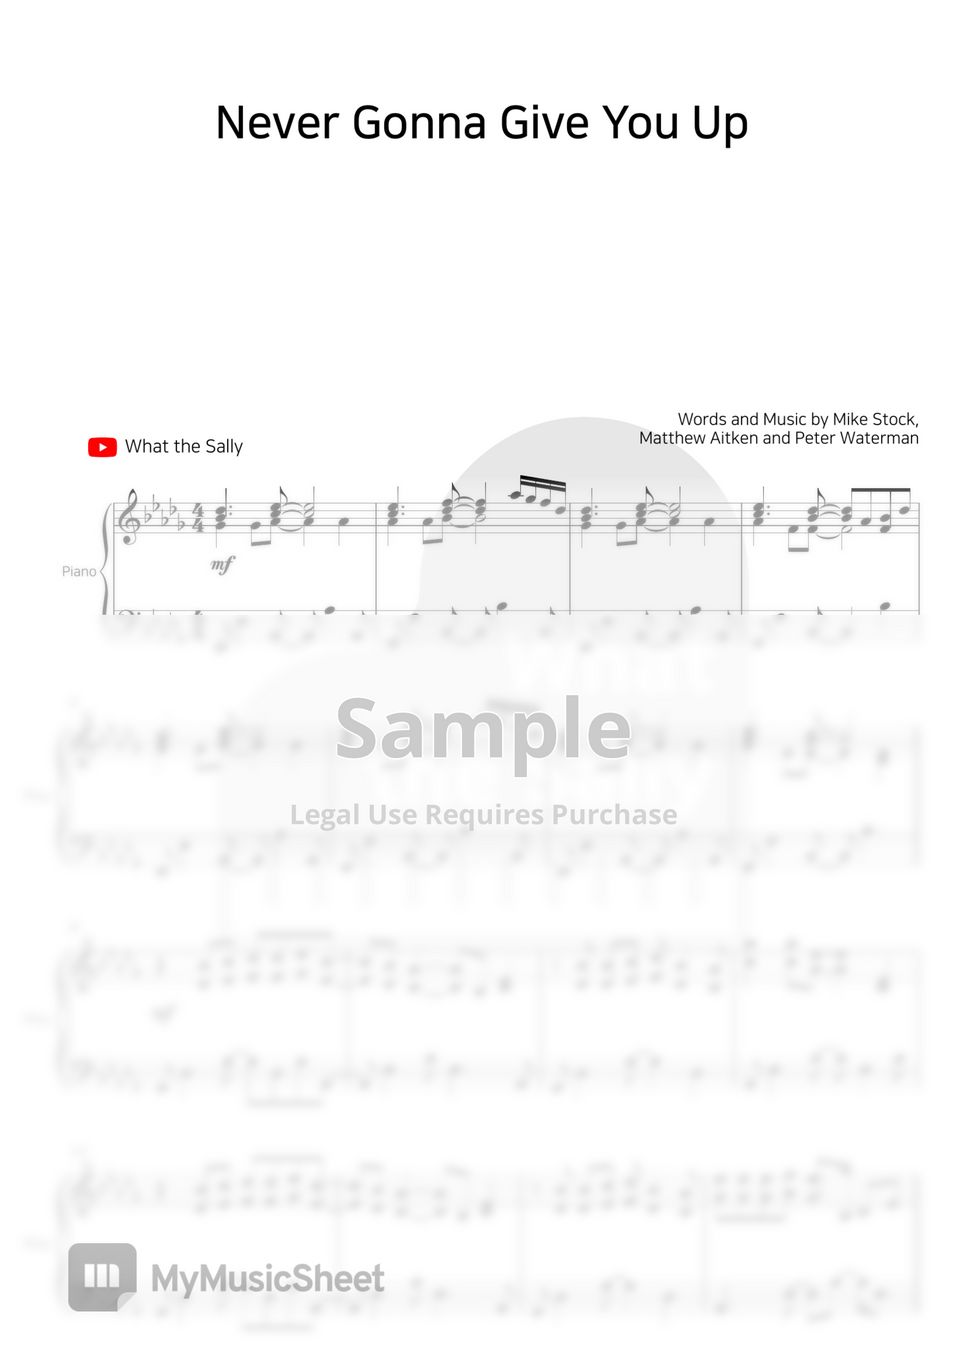 Never Gonna Give You Up – Rick Astley letter notes for beginners - music  notes for newbies